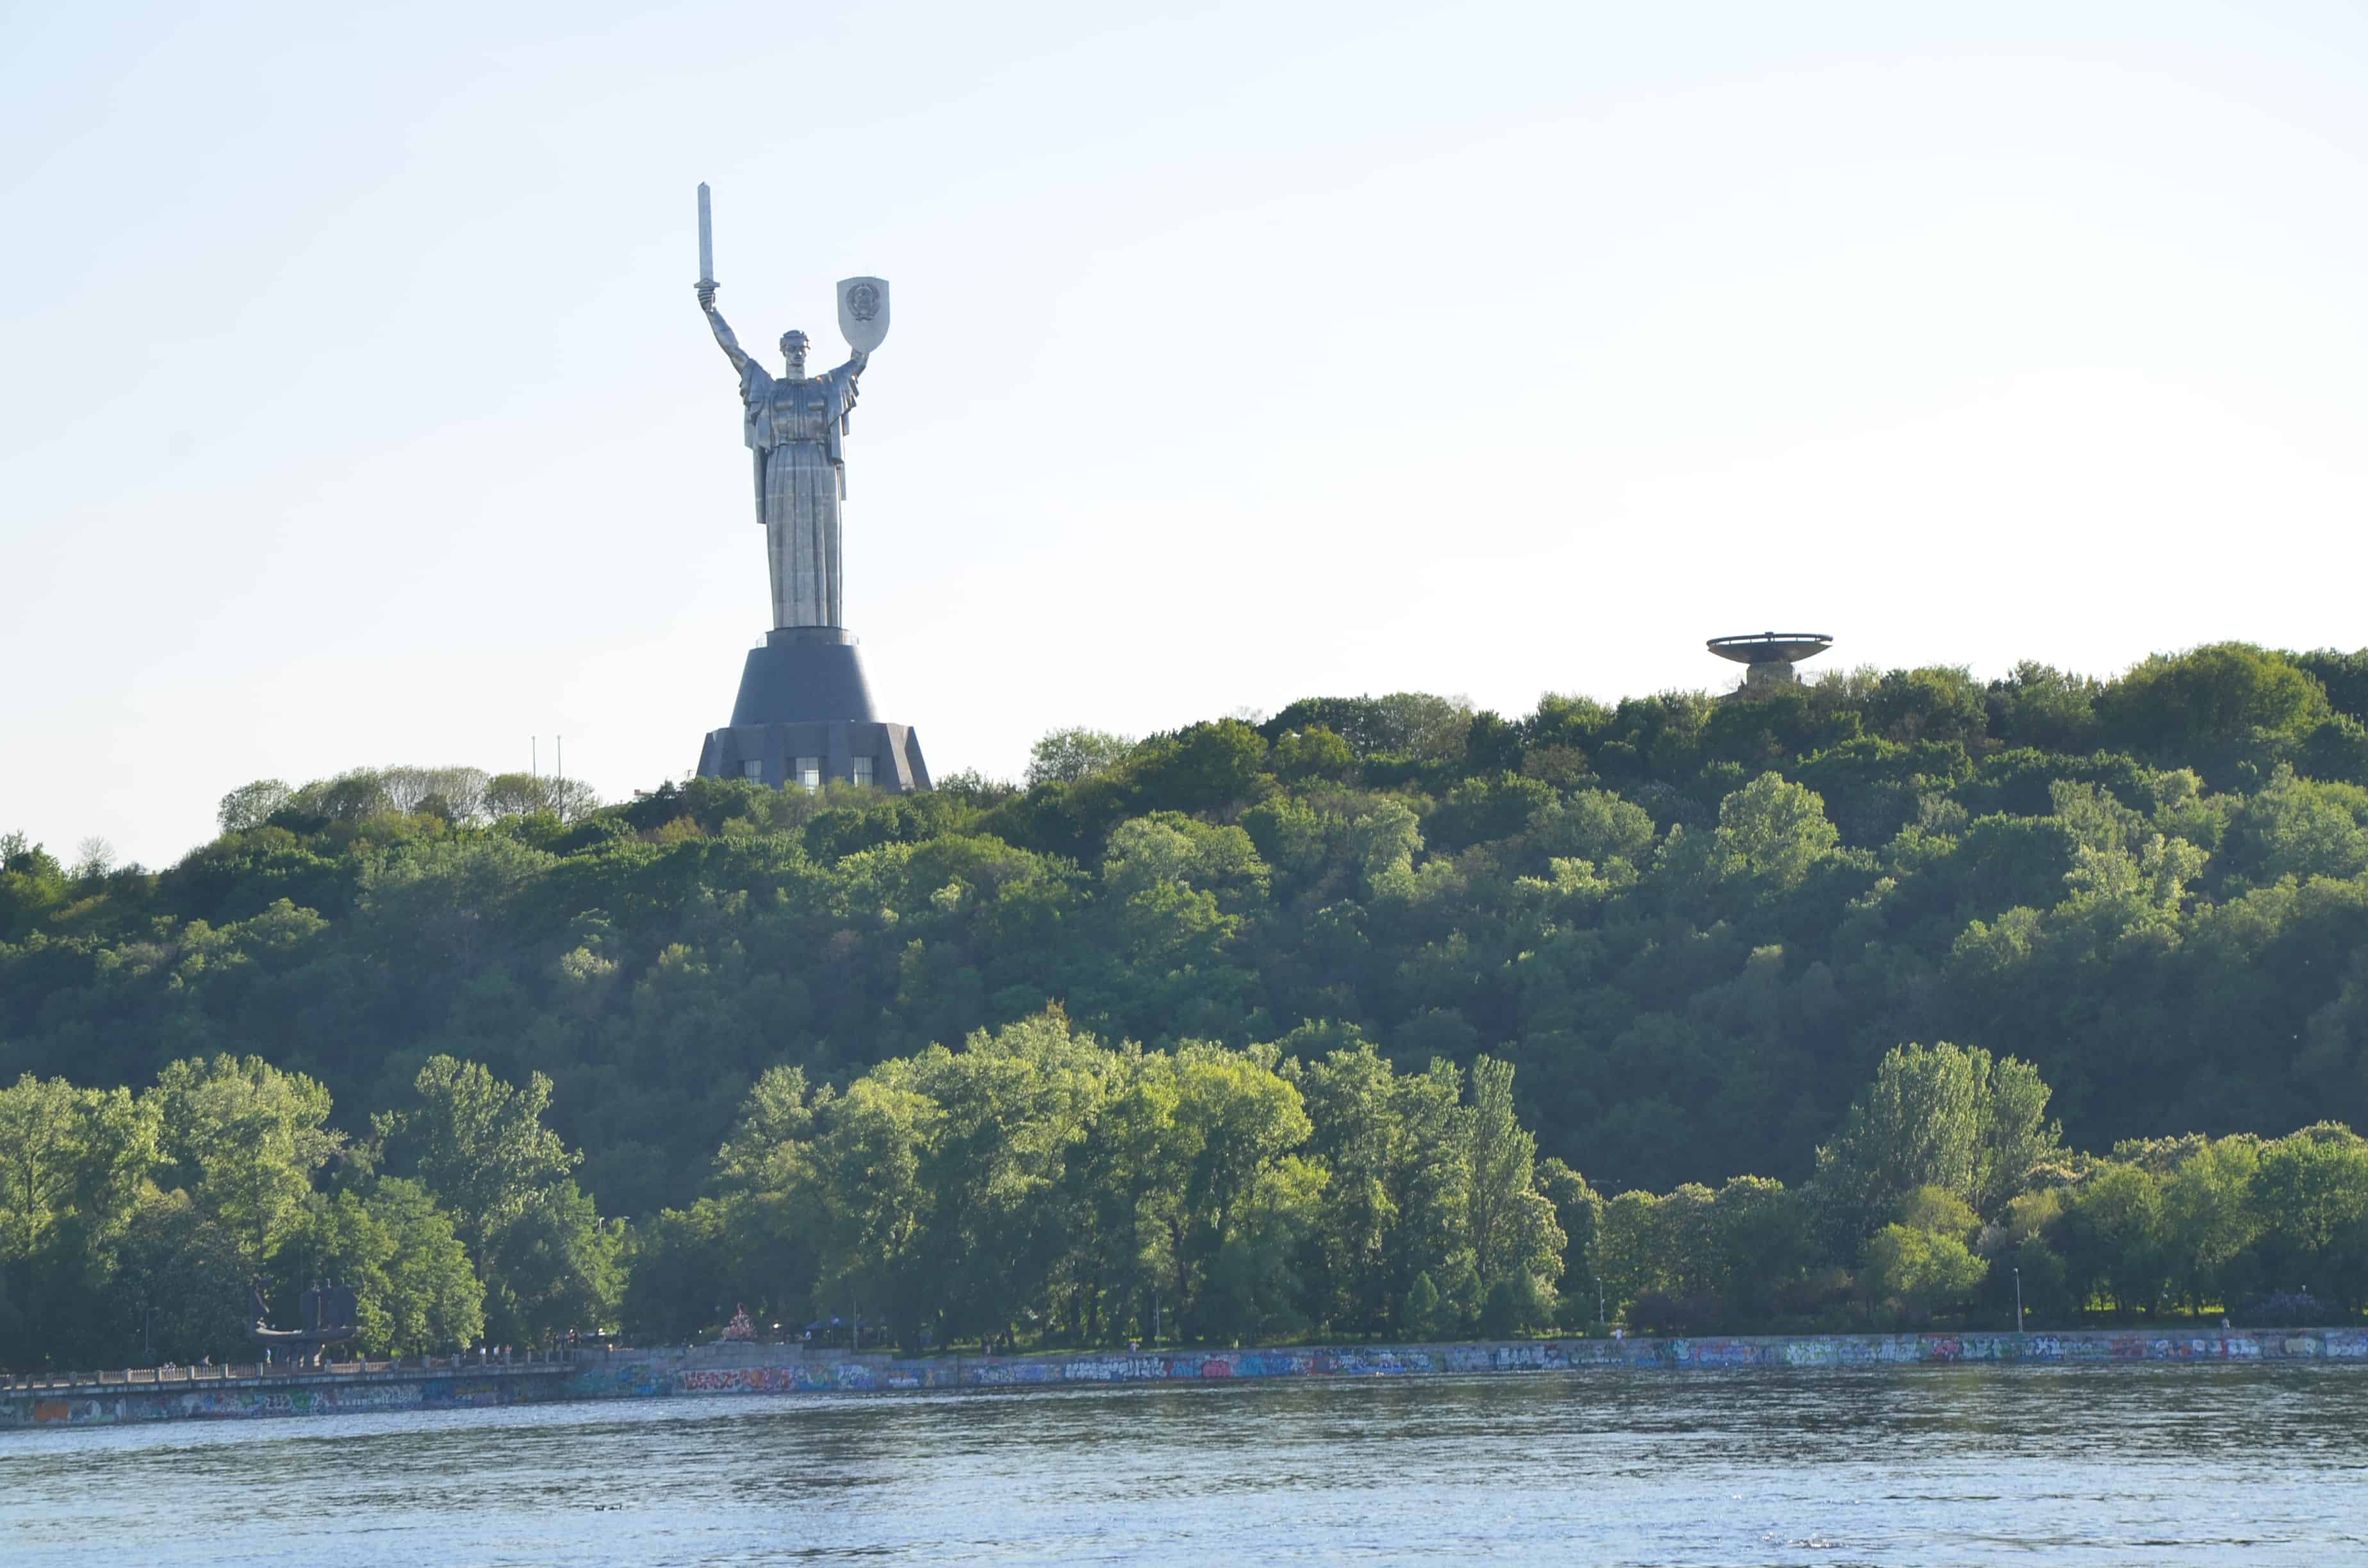 Motherland Monument on the Dnieper River cruise in Kyiv, Ukraine